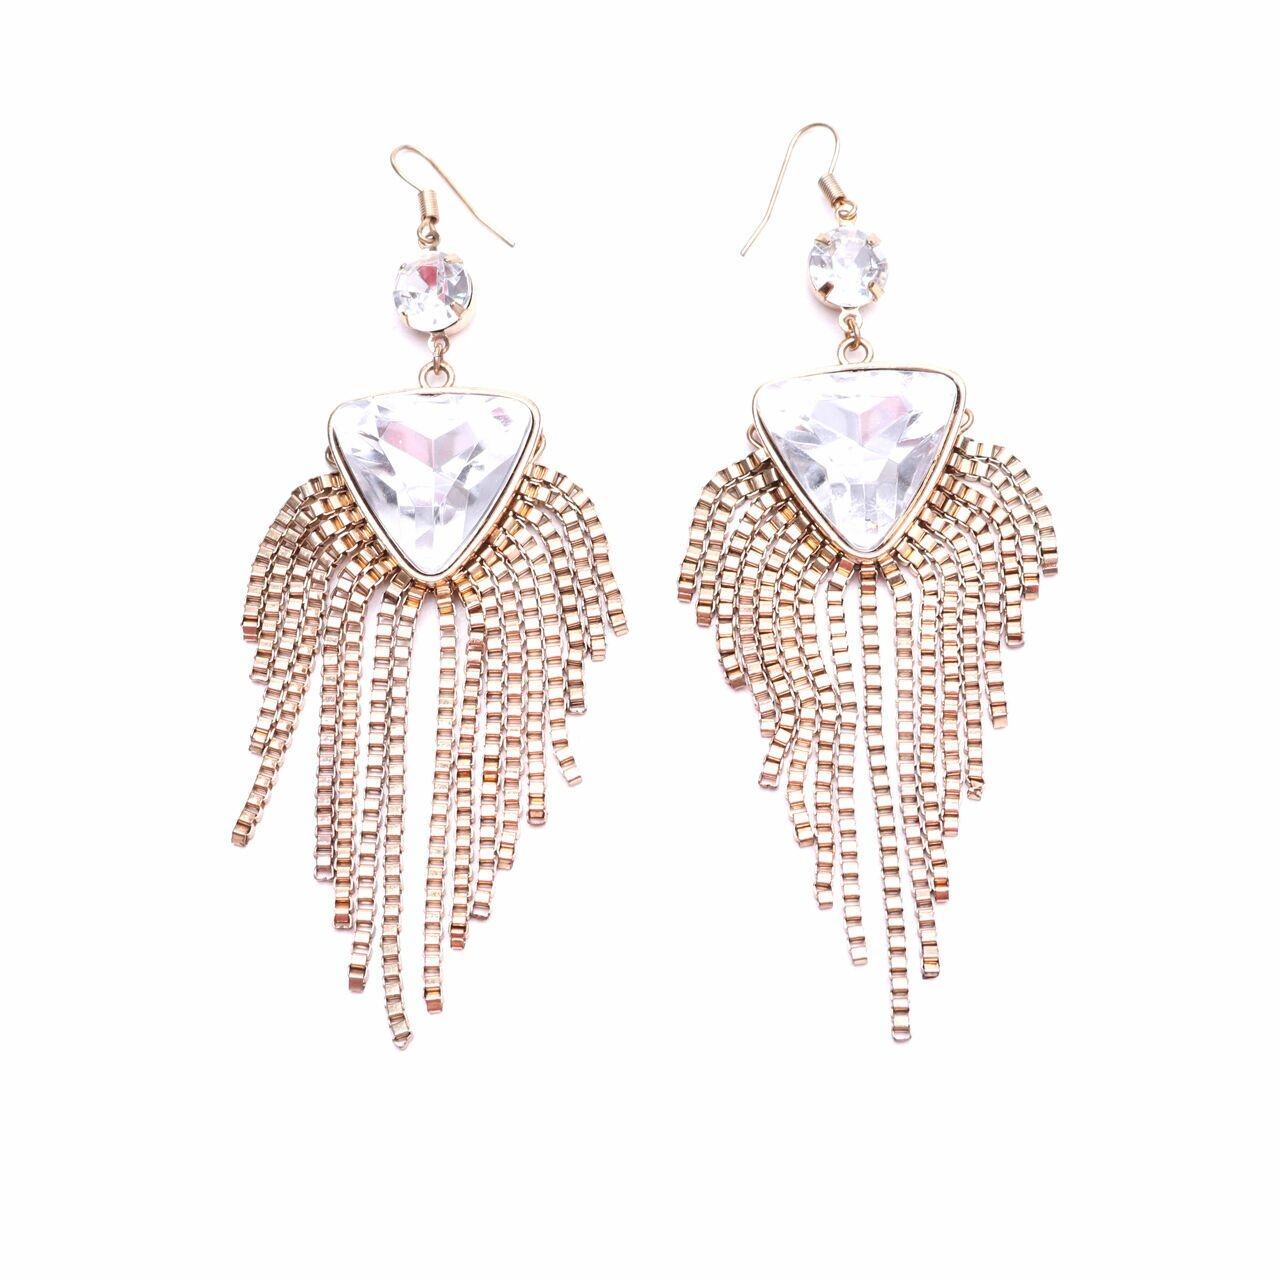 Private Collection Gold Earrings Jewelry